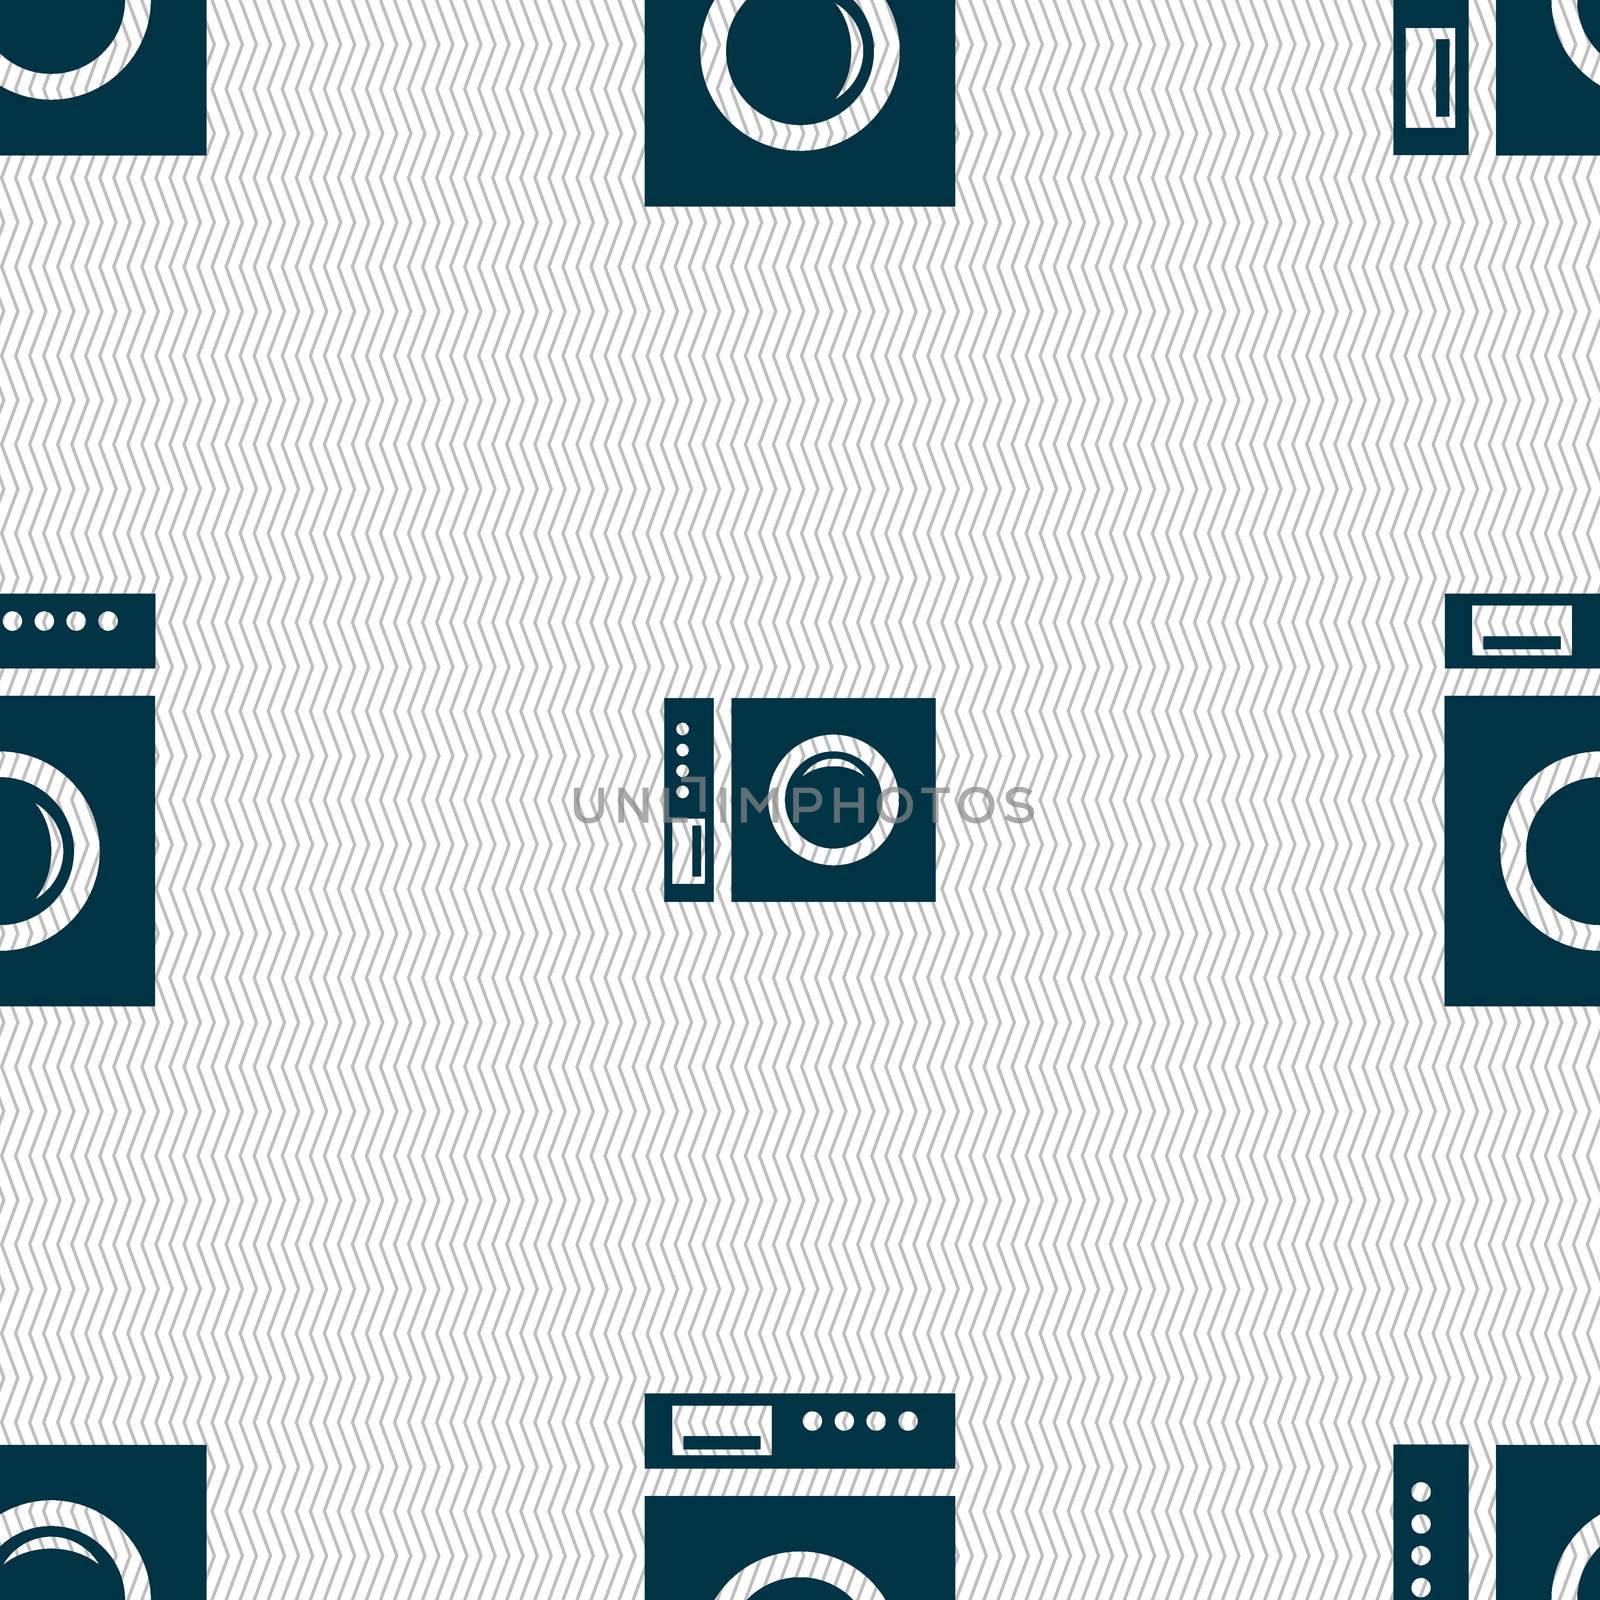 washing machine icon sign. Seamless abstract background with geometric shapes. illustration